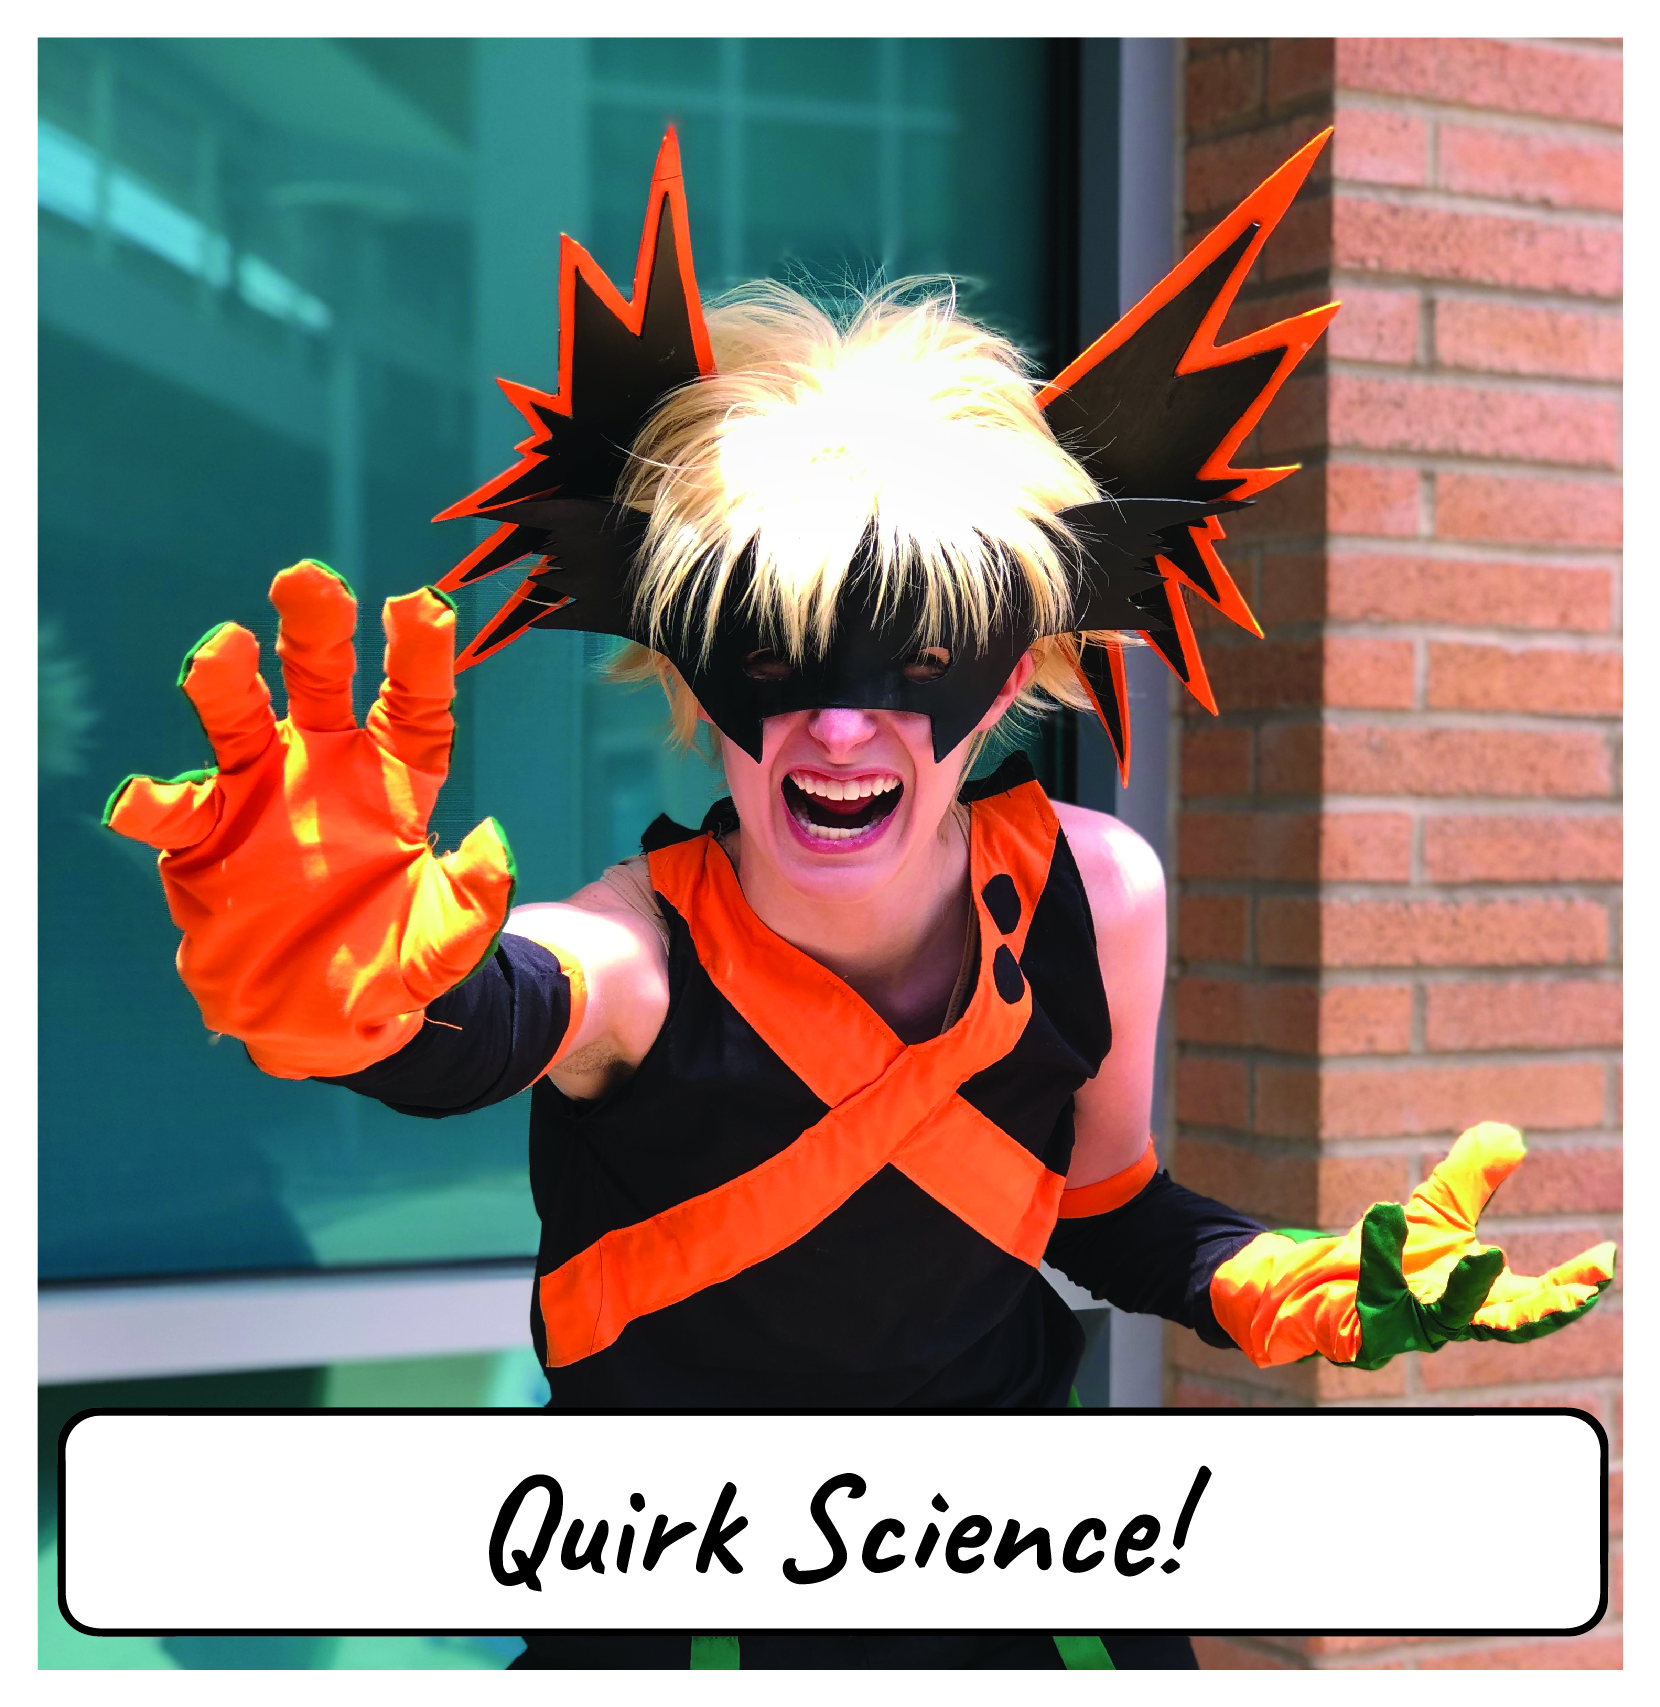 My Hero Academic Quirk Science Cosplay For Science